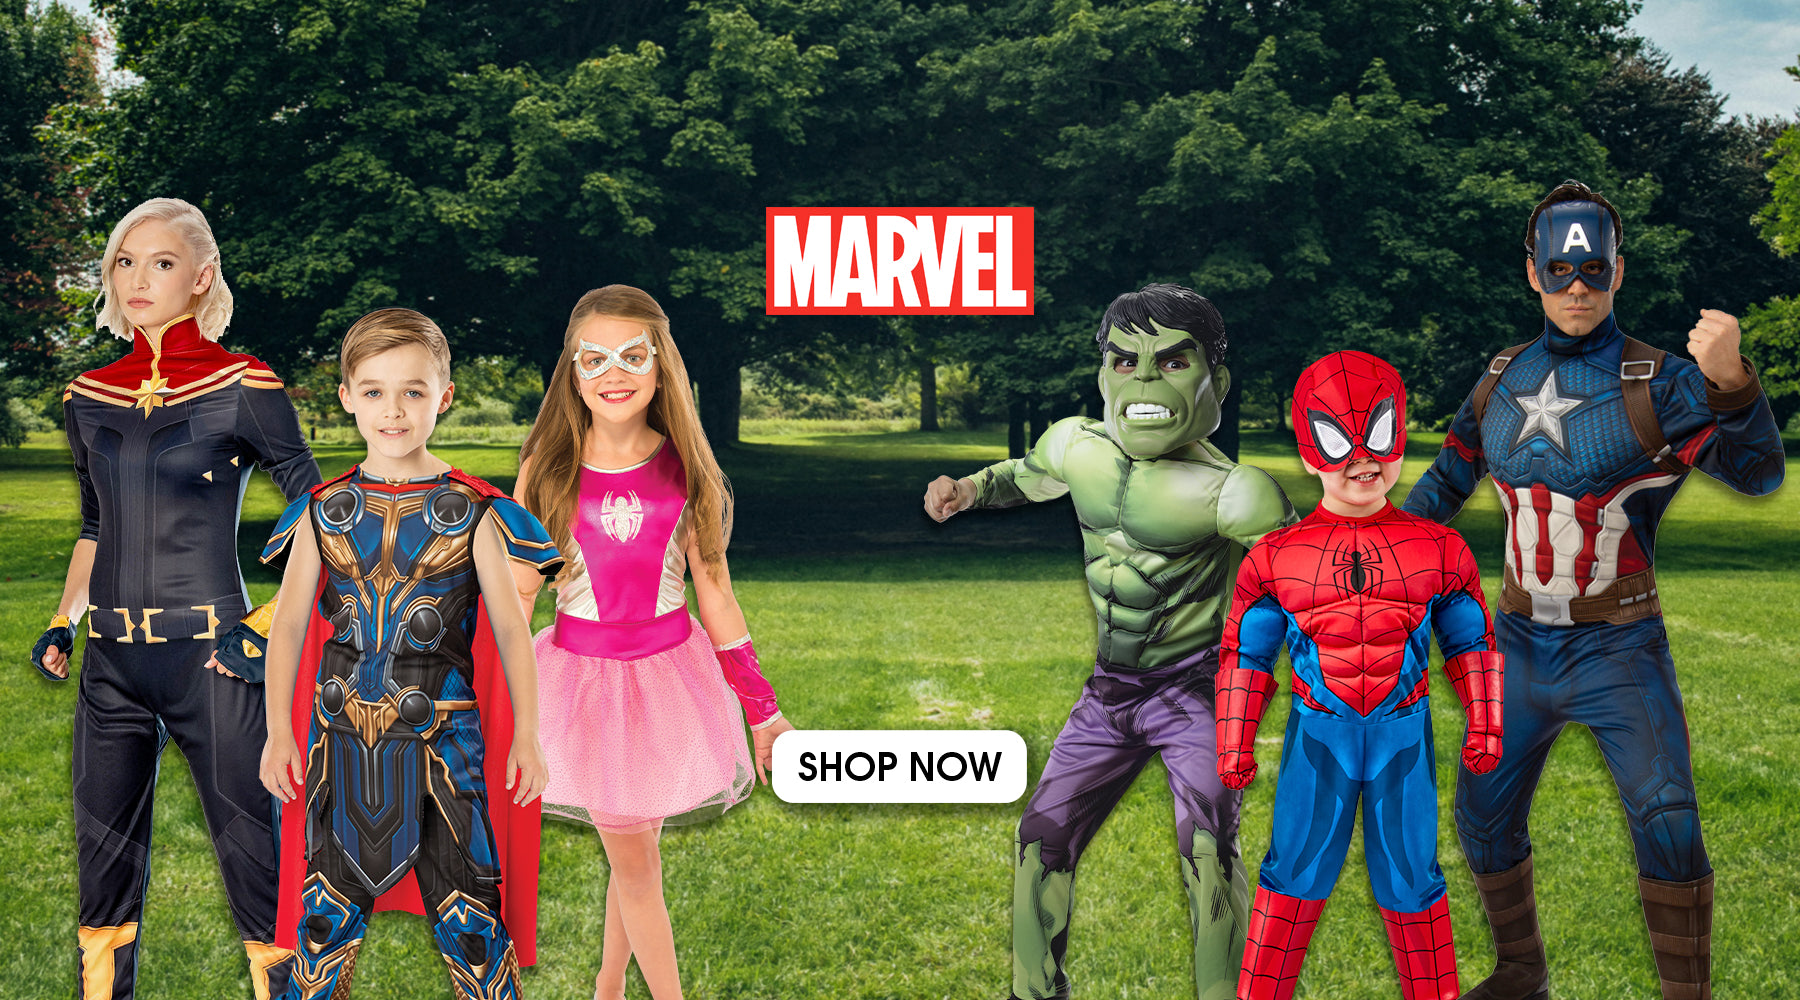 Are you headed to Marvel Universe Live? Grab a Marvel costume so that you really look the part! Order online now at Costume Super Centre Australia, for superfast delivery!